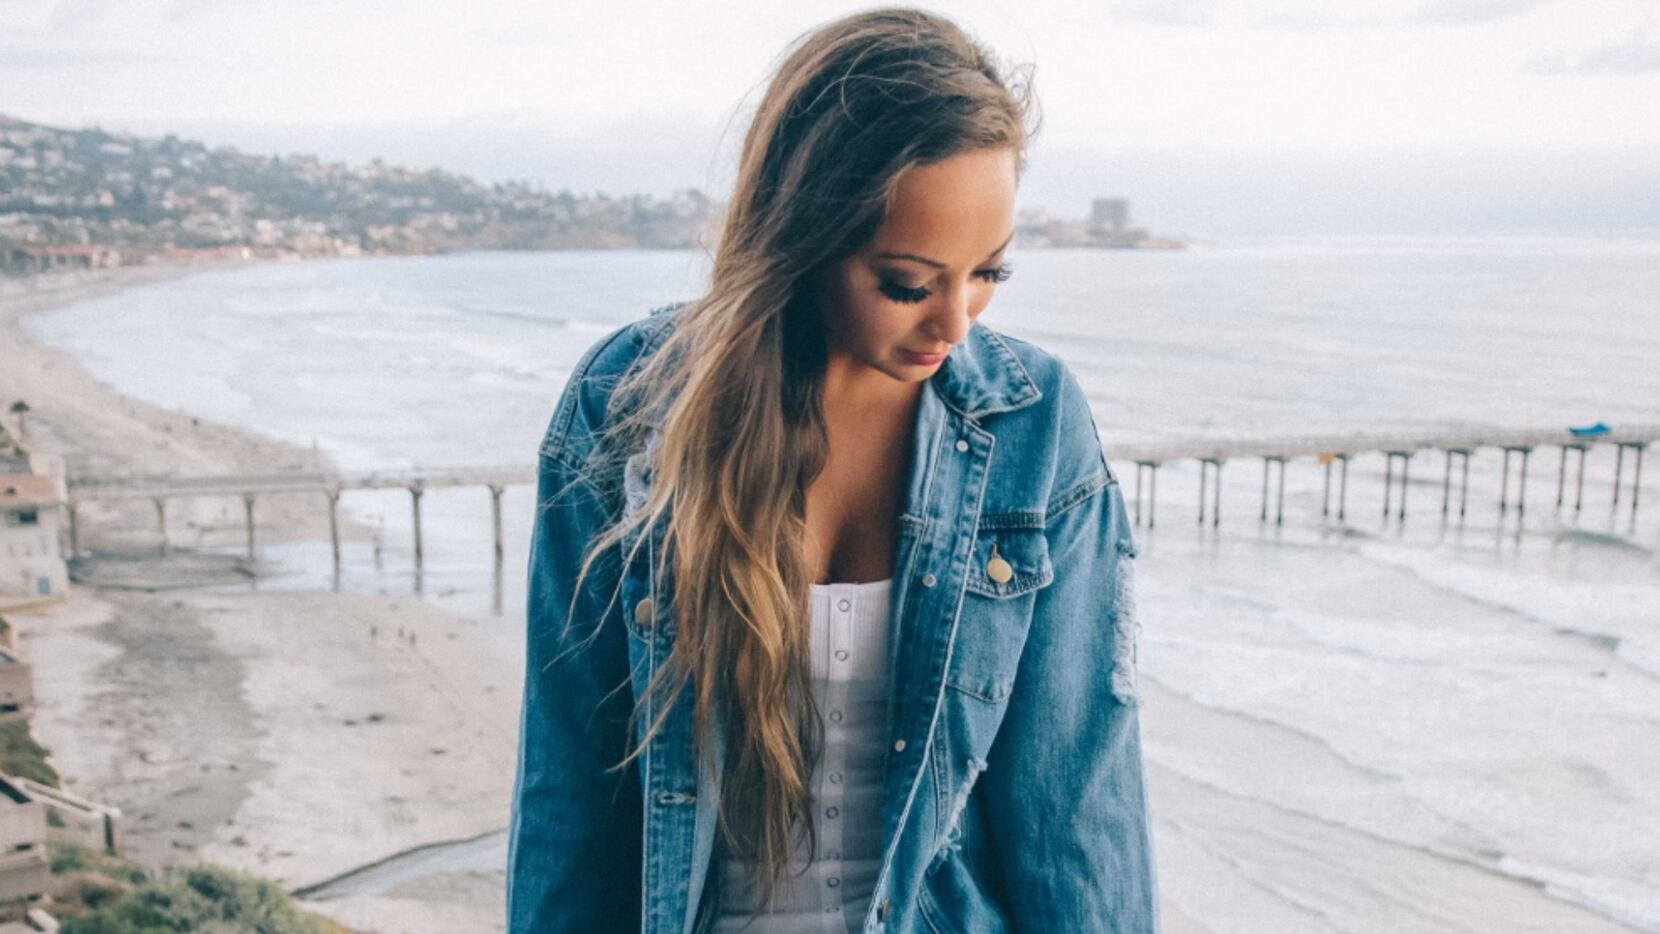 Sarah P Antonella wears a denim jacket while looking down while the beach is in the background